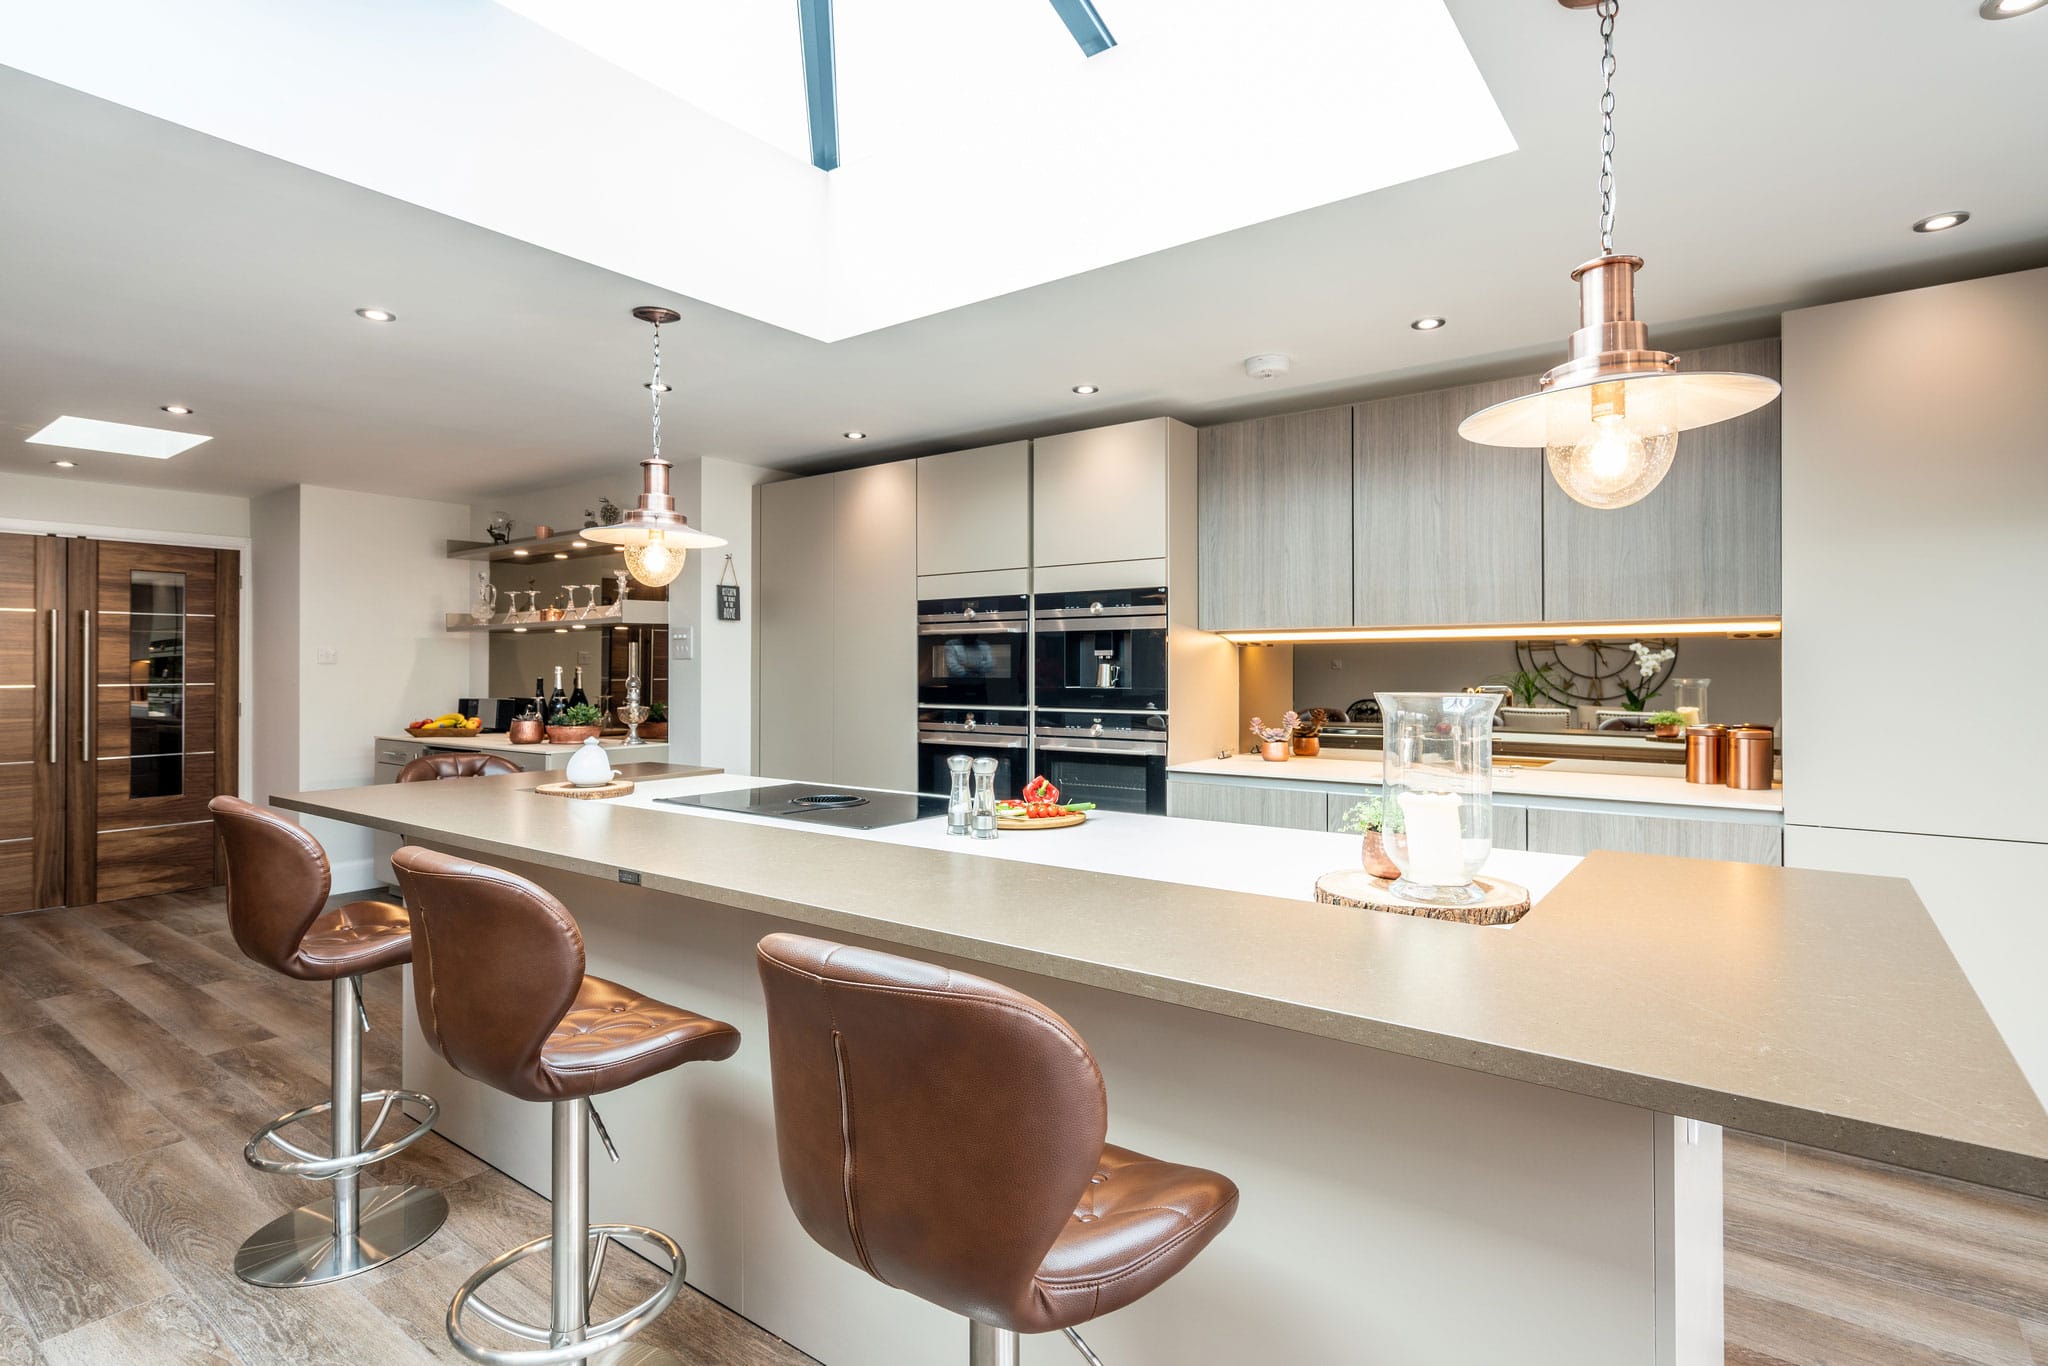 Image of Myers Touch Daniels Kitchen 01038 ZF 2442 14358 1 034 in London Home - Cosentino